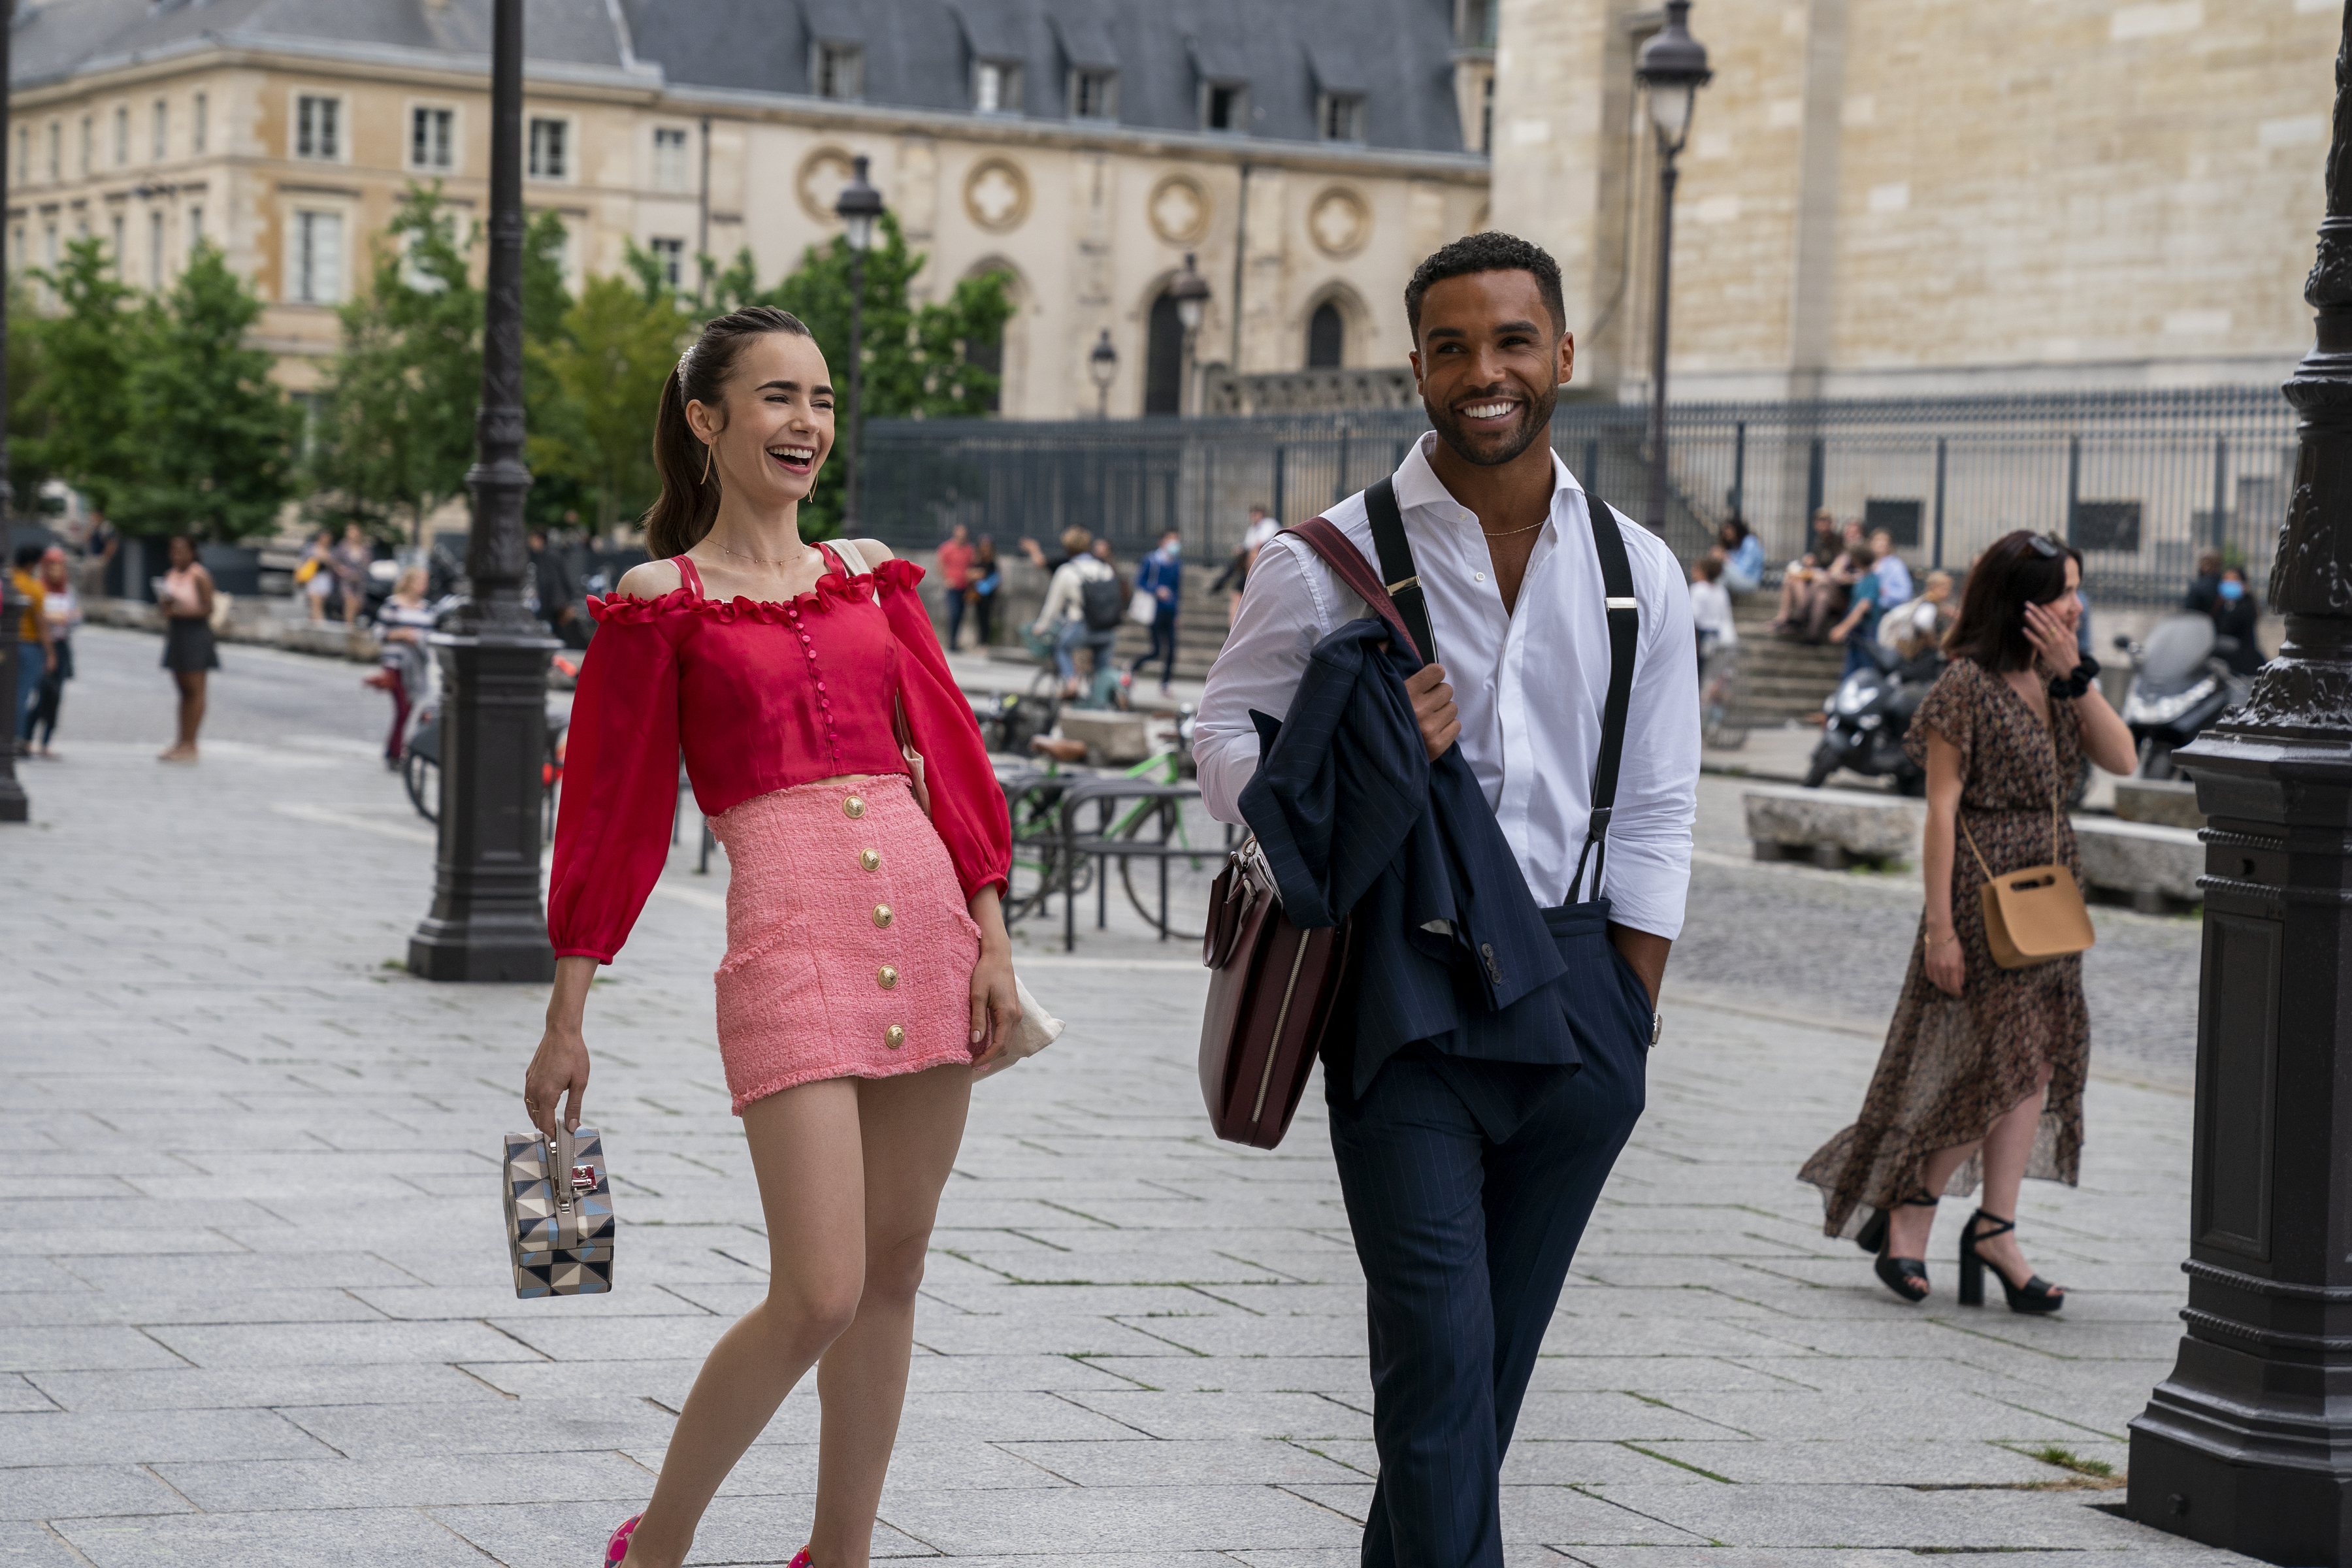 Lily Collins as Emily and Lucien Laviscount as Alfie in season 2 of 'Emily in Paris.' (STÉPHANIE BRANCHU/NETFLIX—© 2021 Netflix, Inc.)